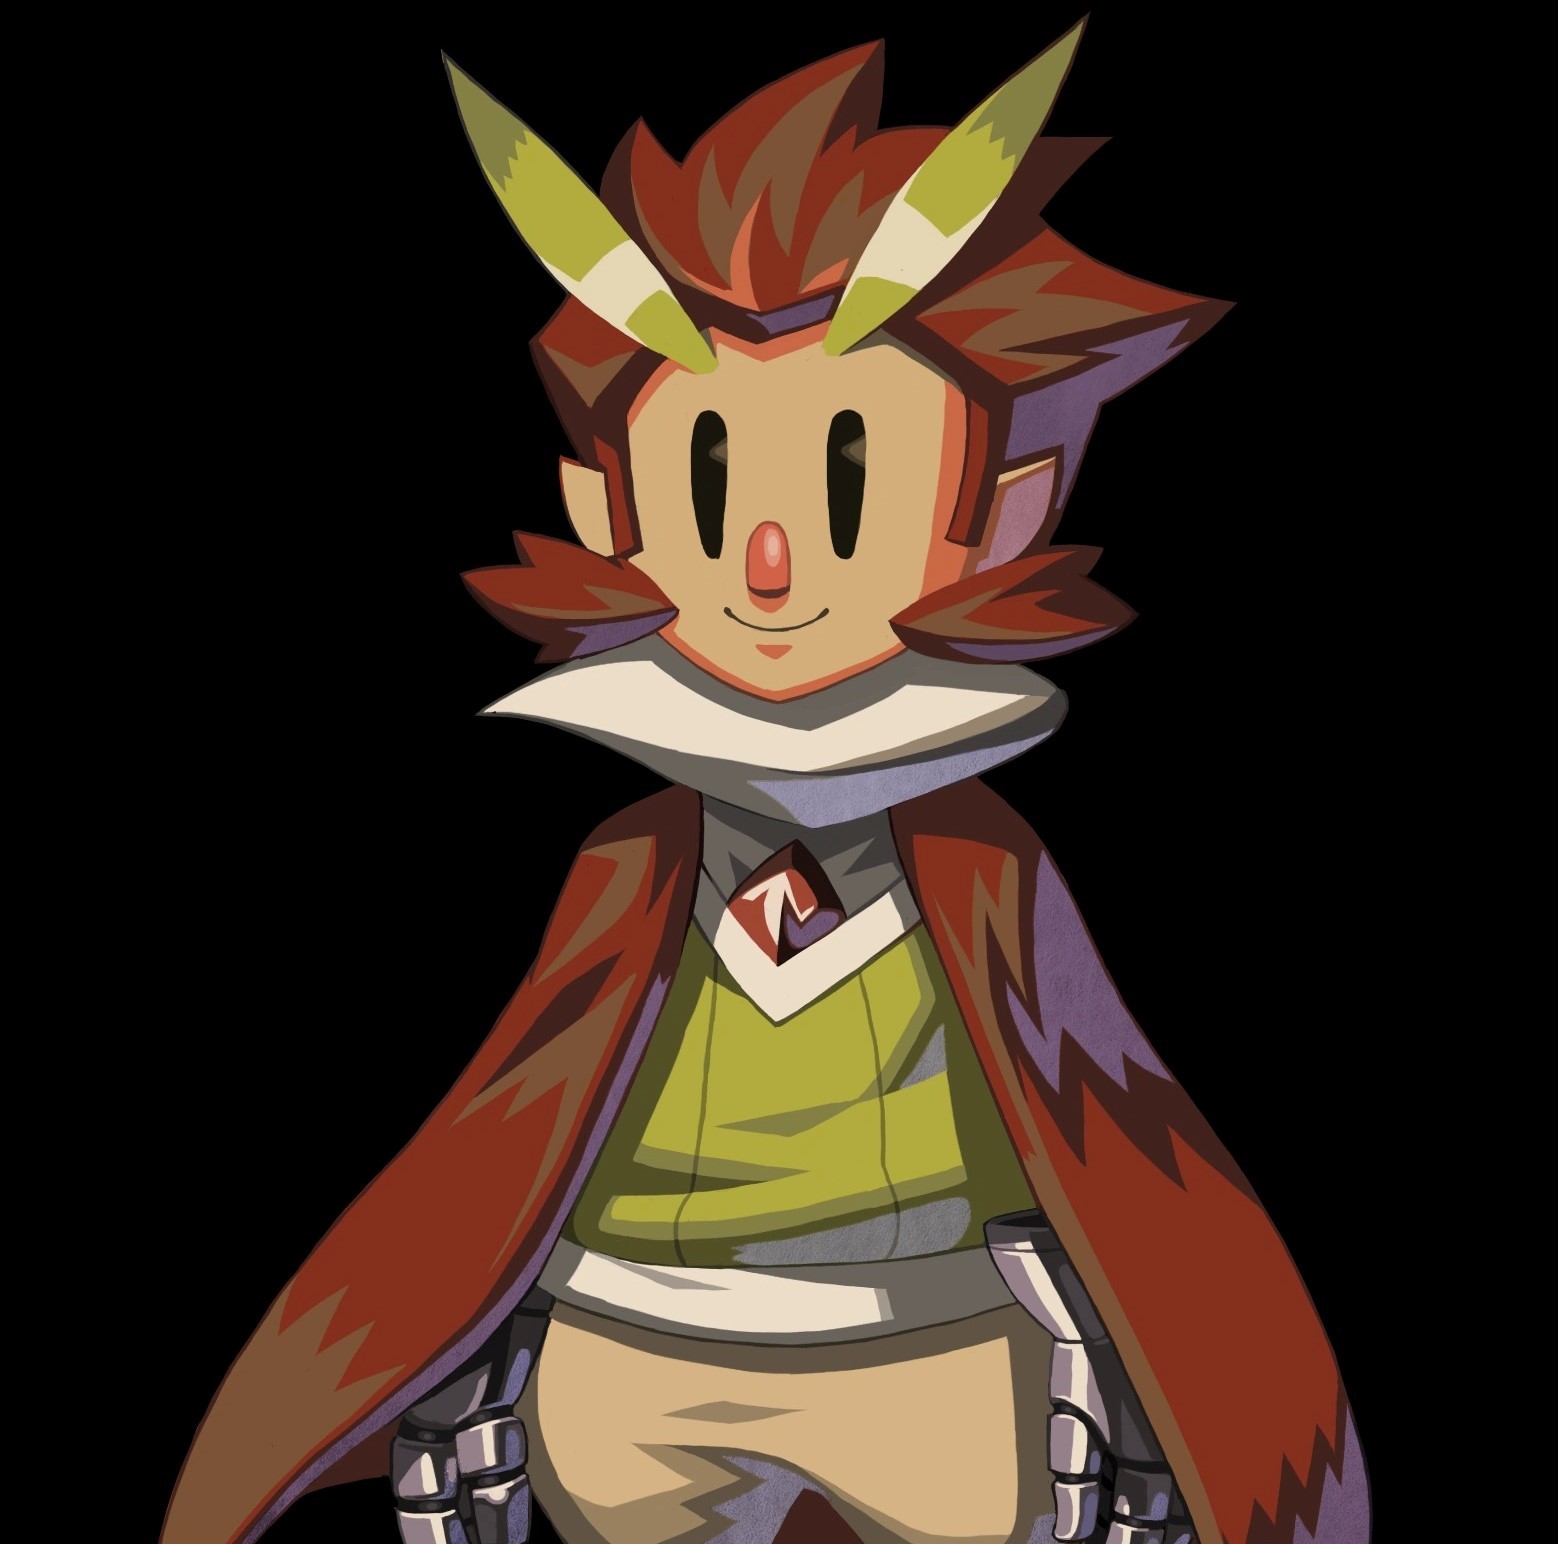 24-facts-about-otus-owlboy